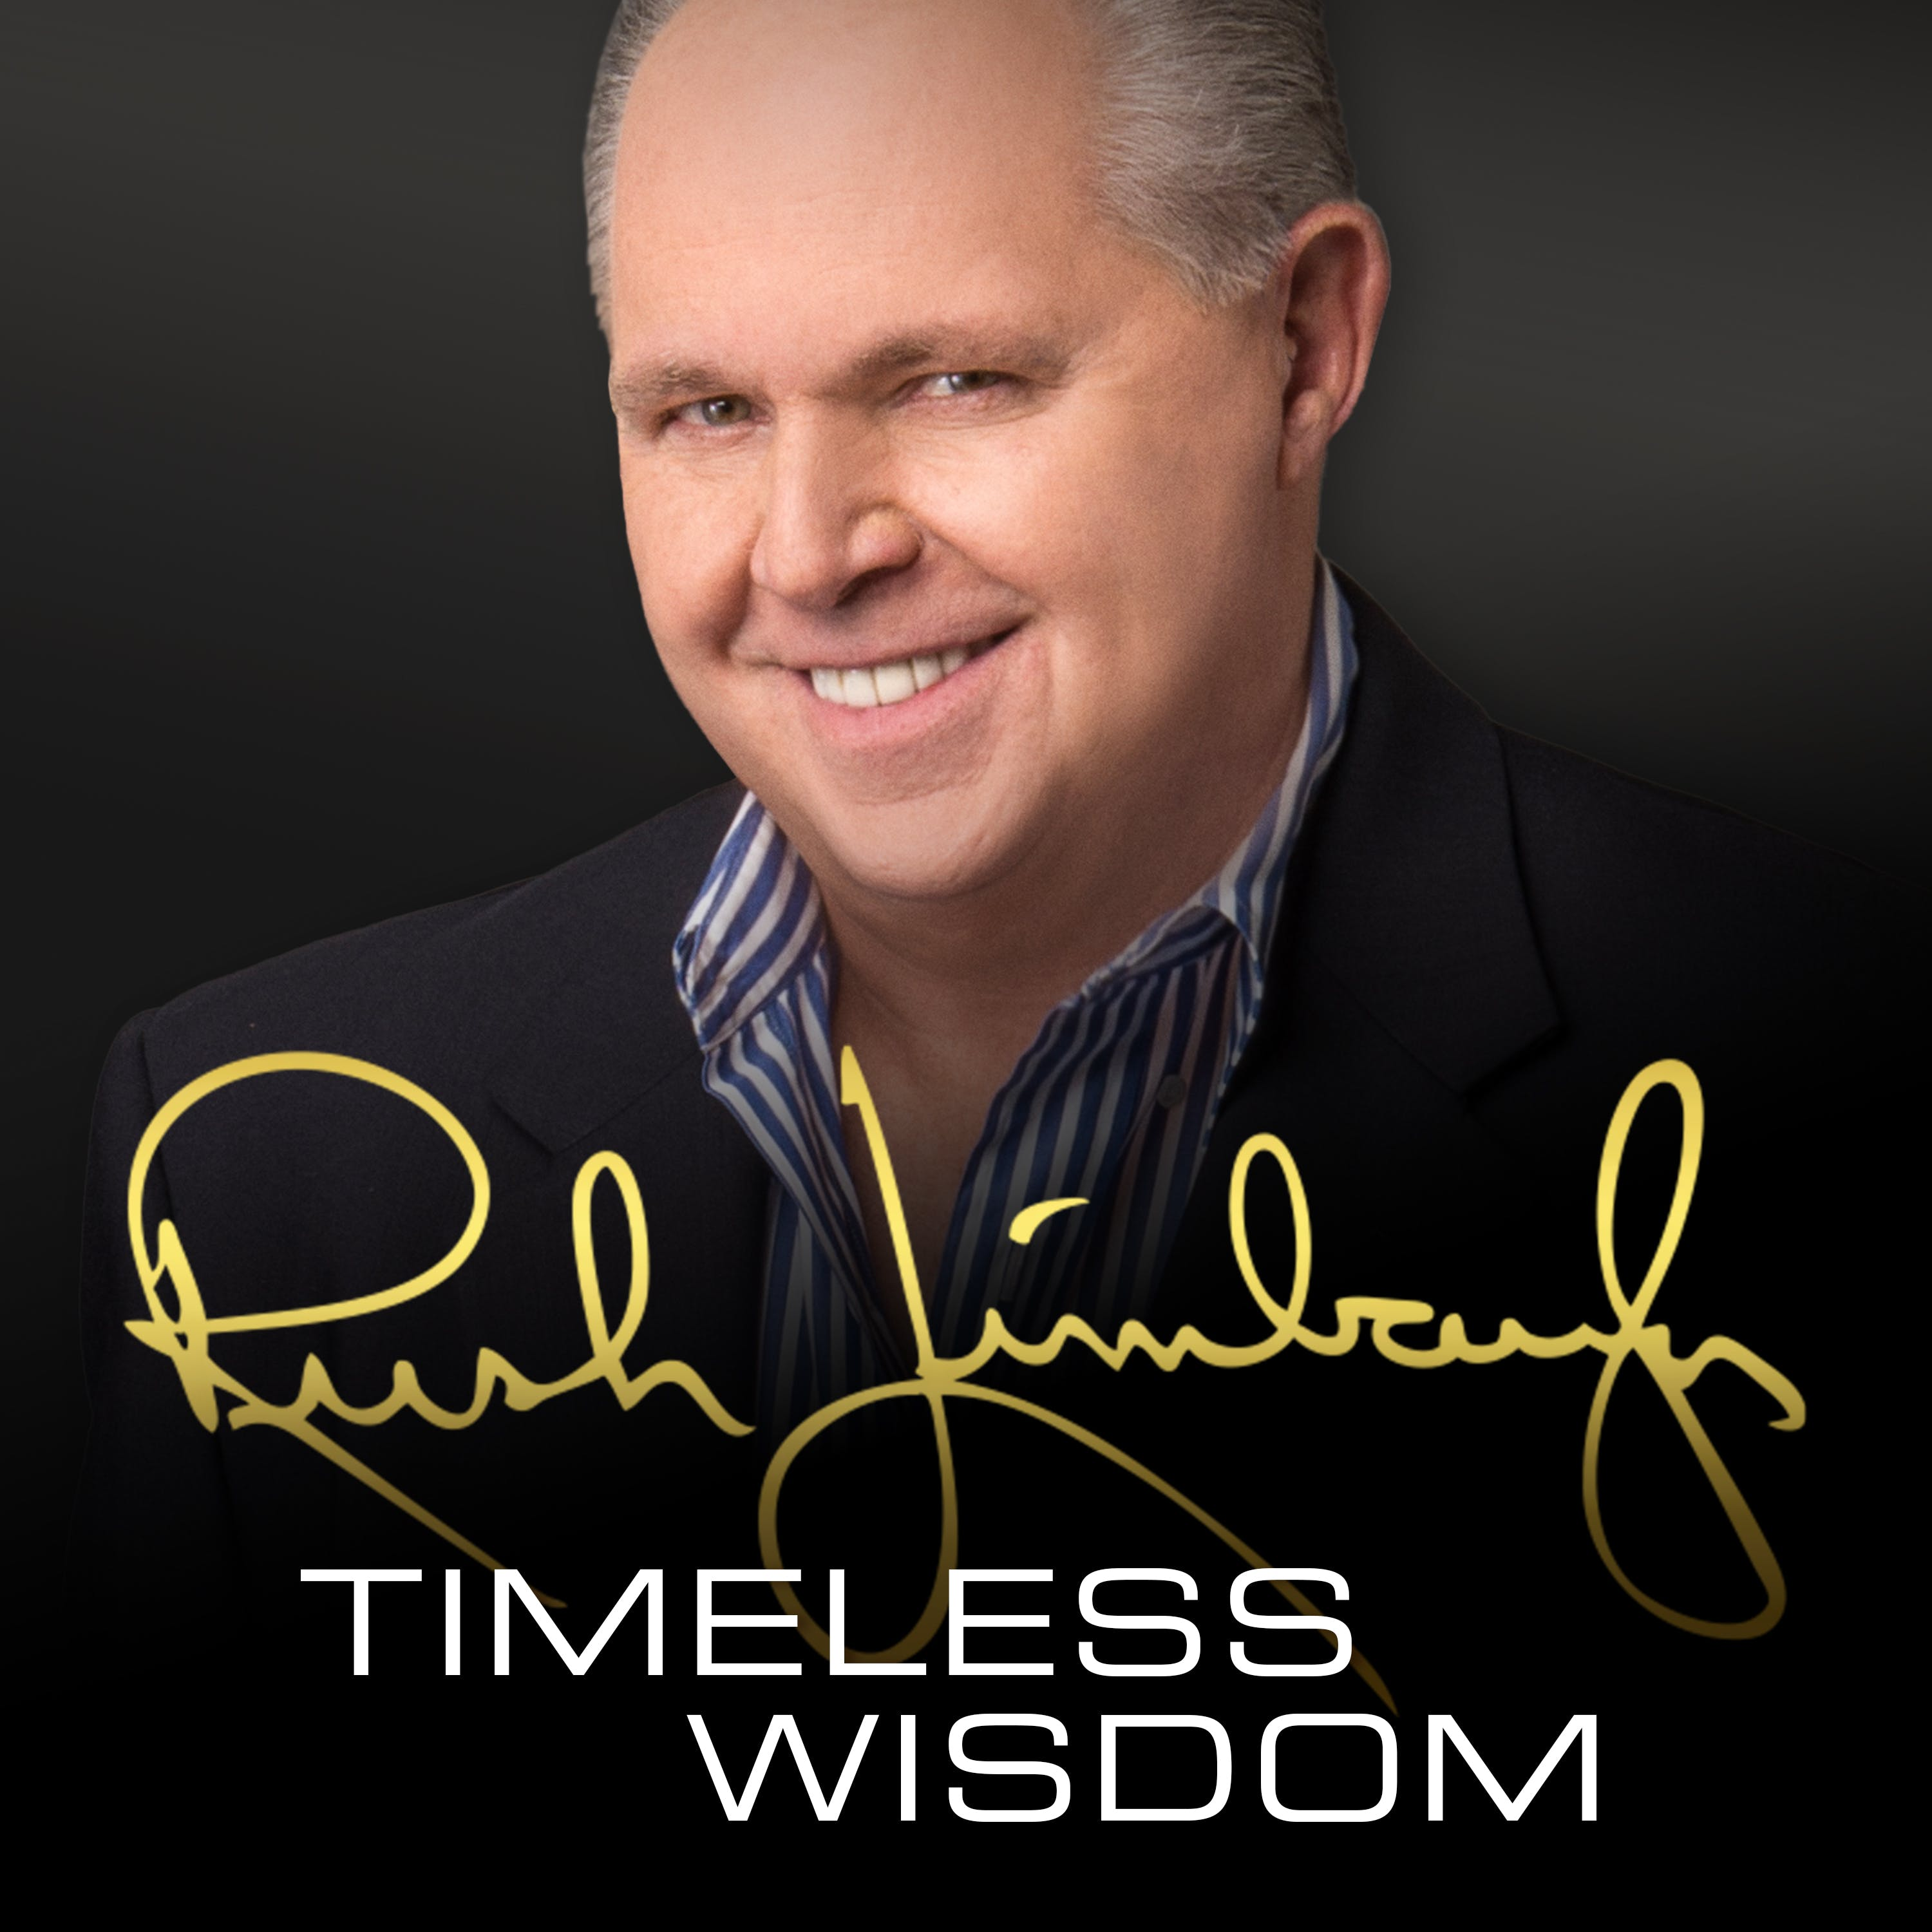 Rush's Timeless Wisdom - Flu Cured? Rush Figured It Out for You in January